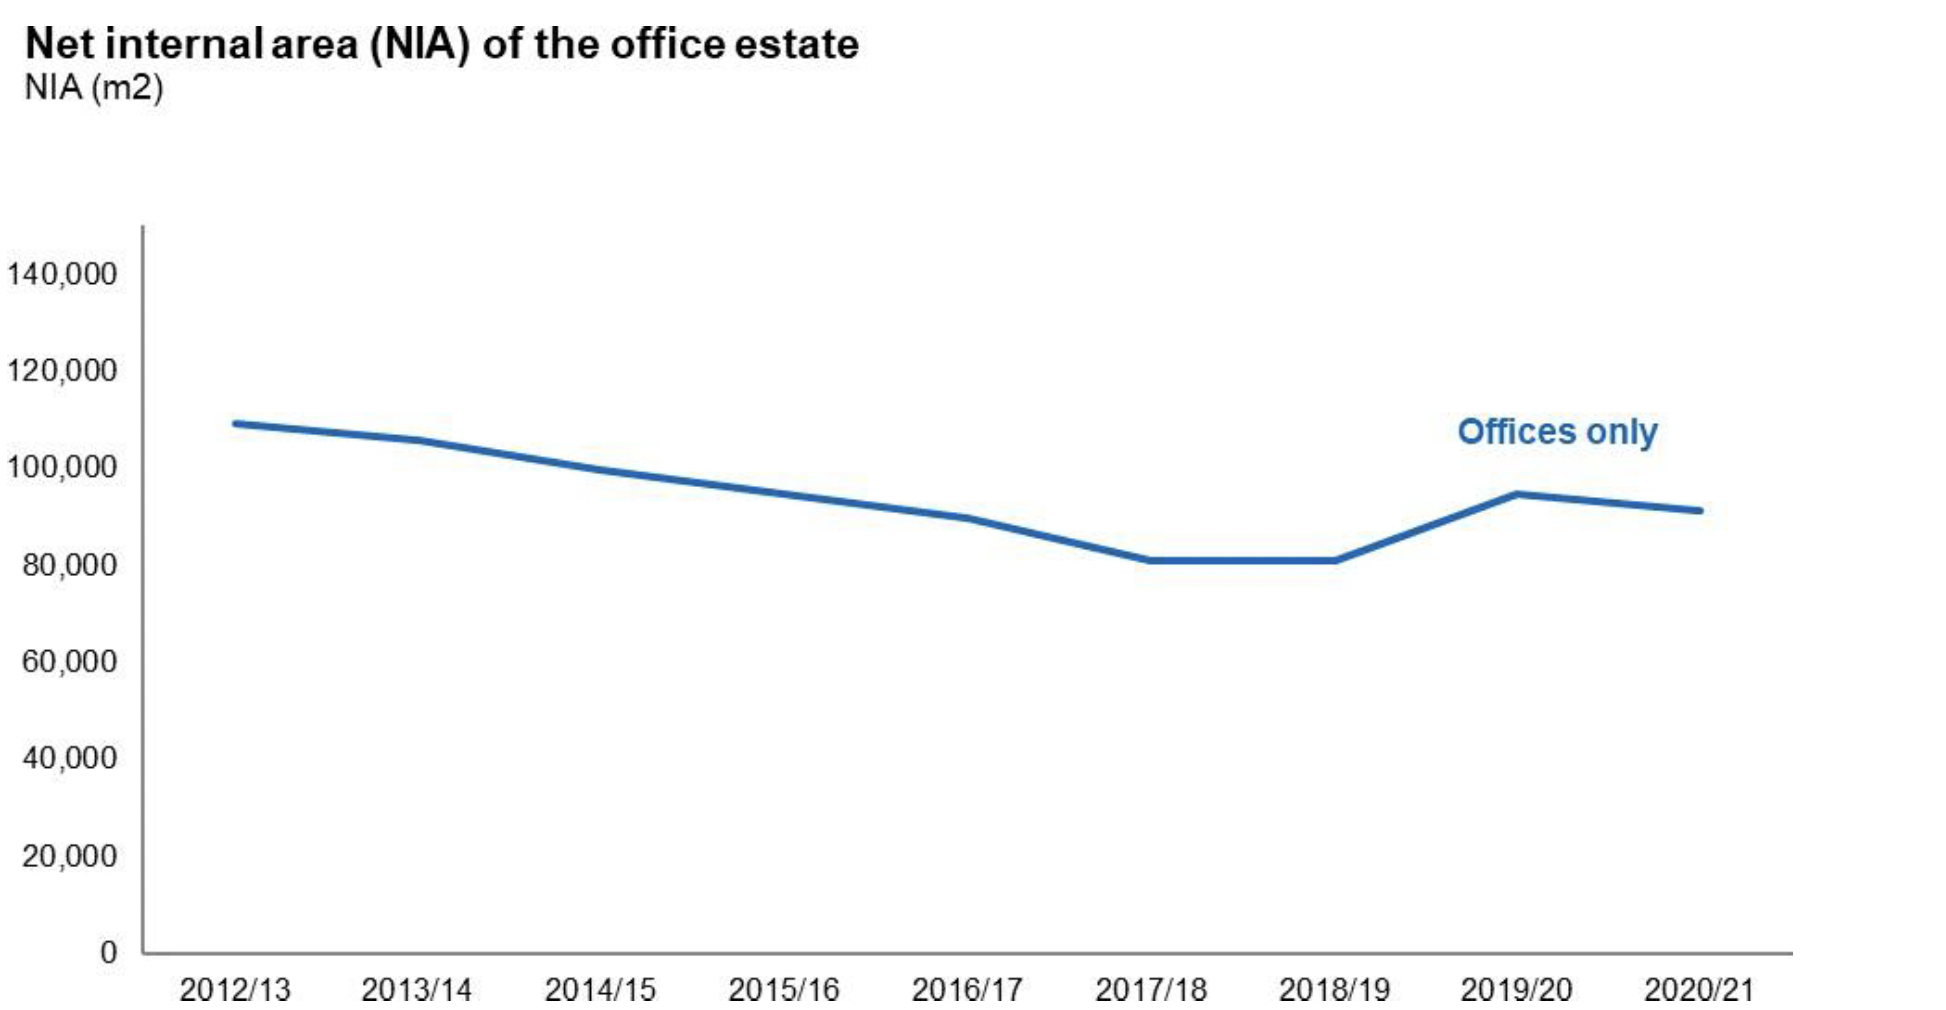 2. Net internal area (NIA) of the office estate – A graph showing the annual net internal area of the office buildings covered in this report from 2012/13 to 2020/21. The current figure is 91,284 metres squared (m2).